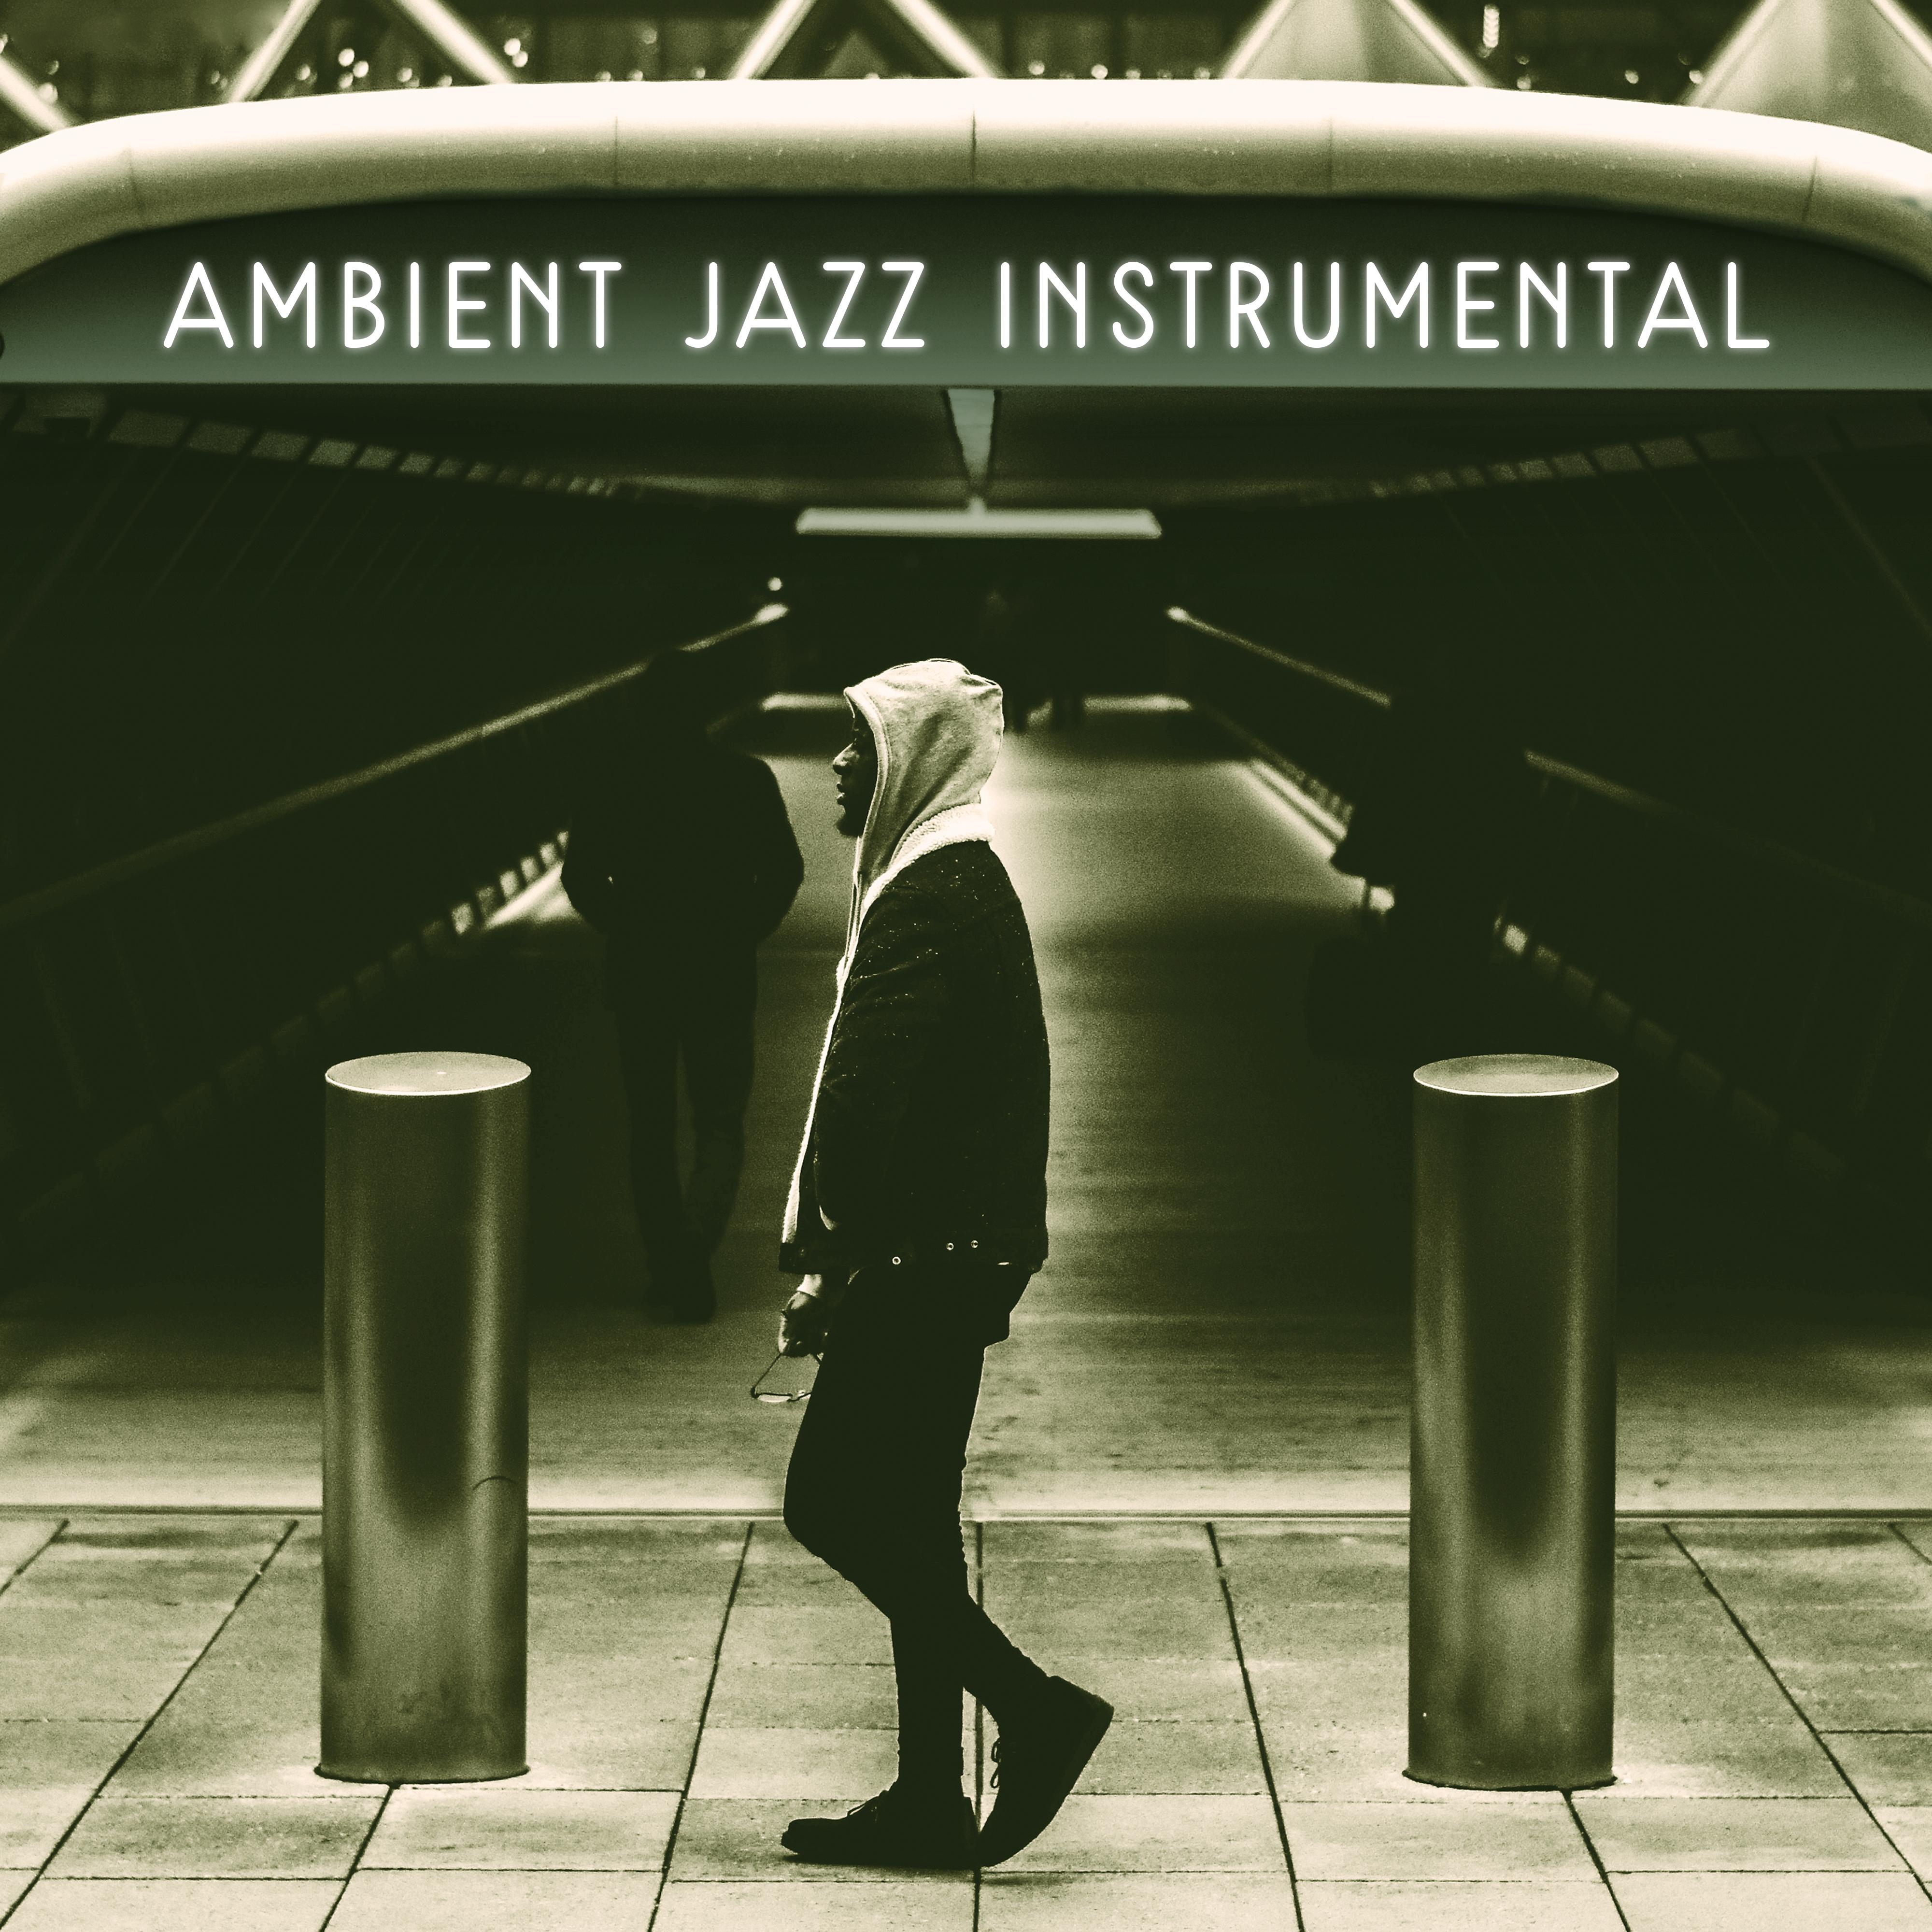 Ambient Jazz Instrumental  Jazz Lounge, Mellow Music, Piano Bar, Relaxed Jazz Songs, Solo Piano